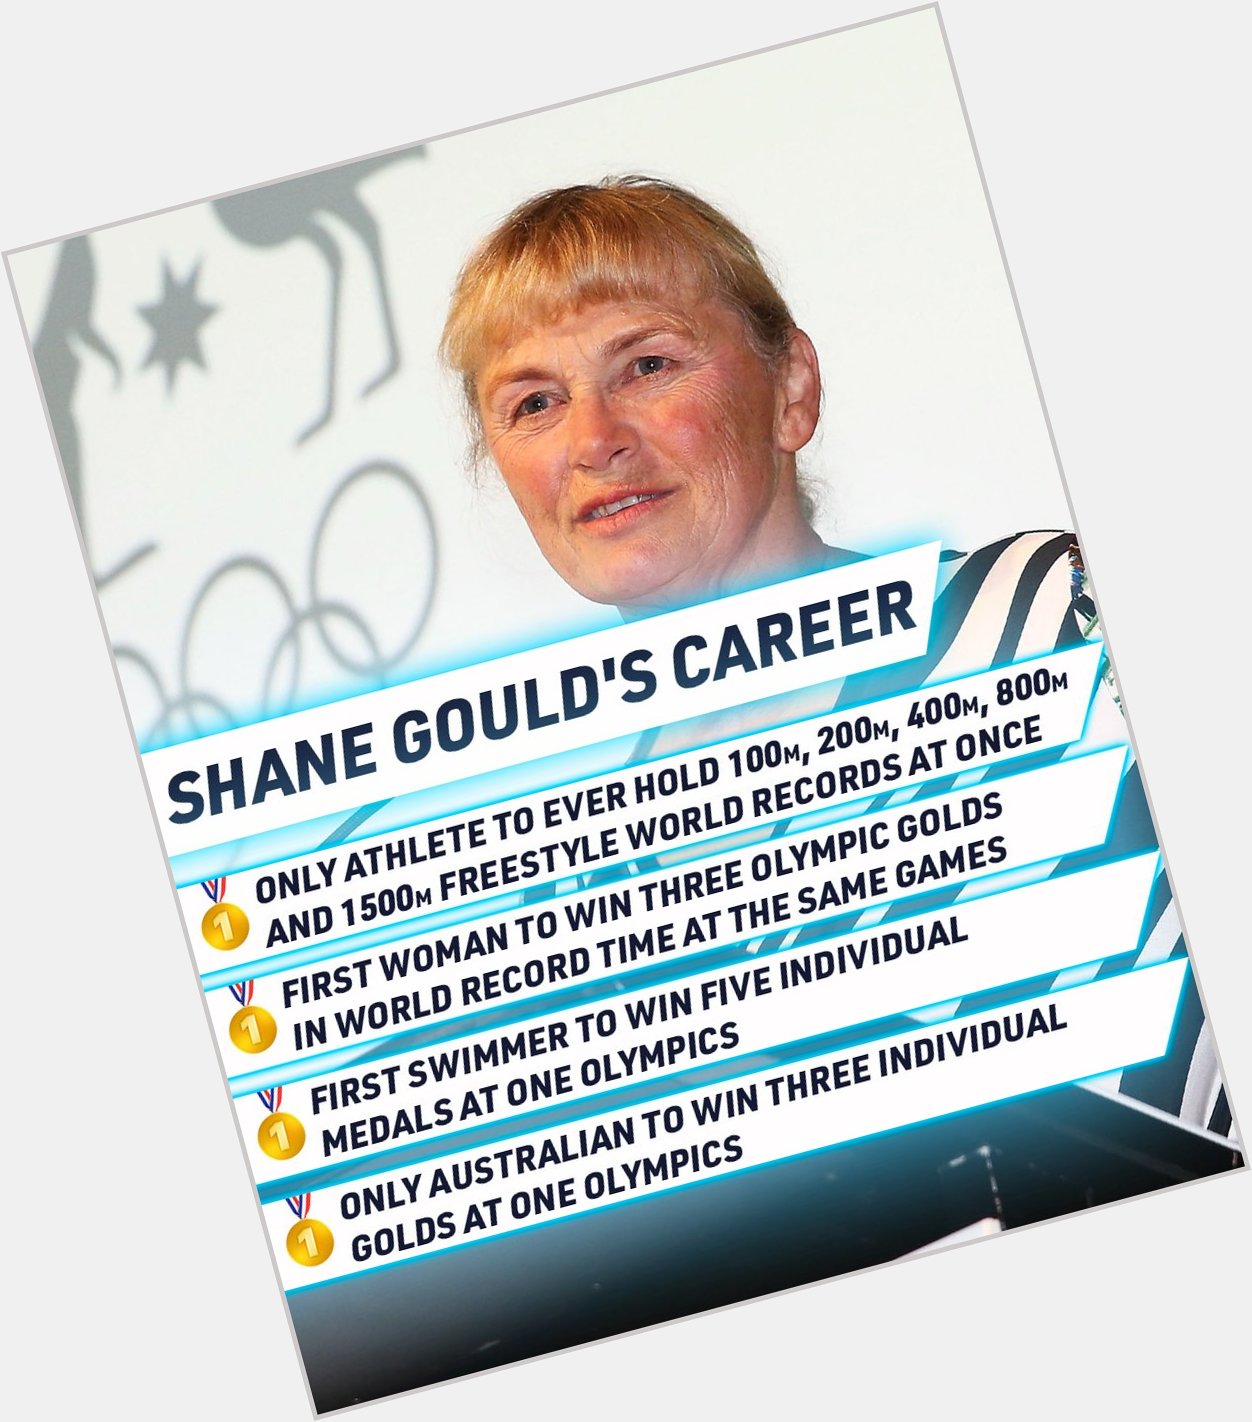 Happy birthday Shane Gould!  One of our greatest Olympians.  